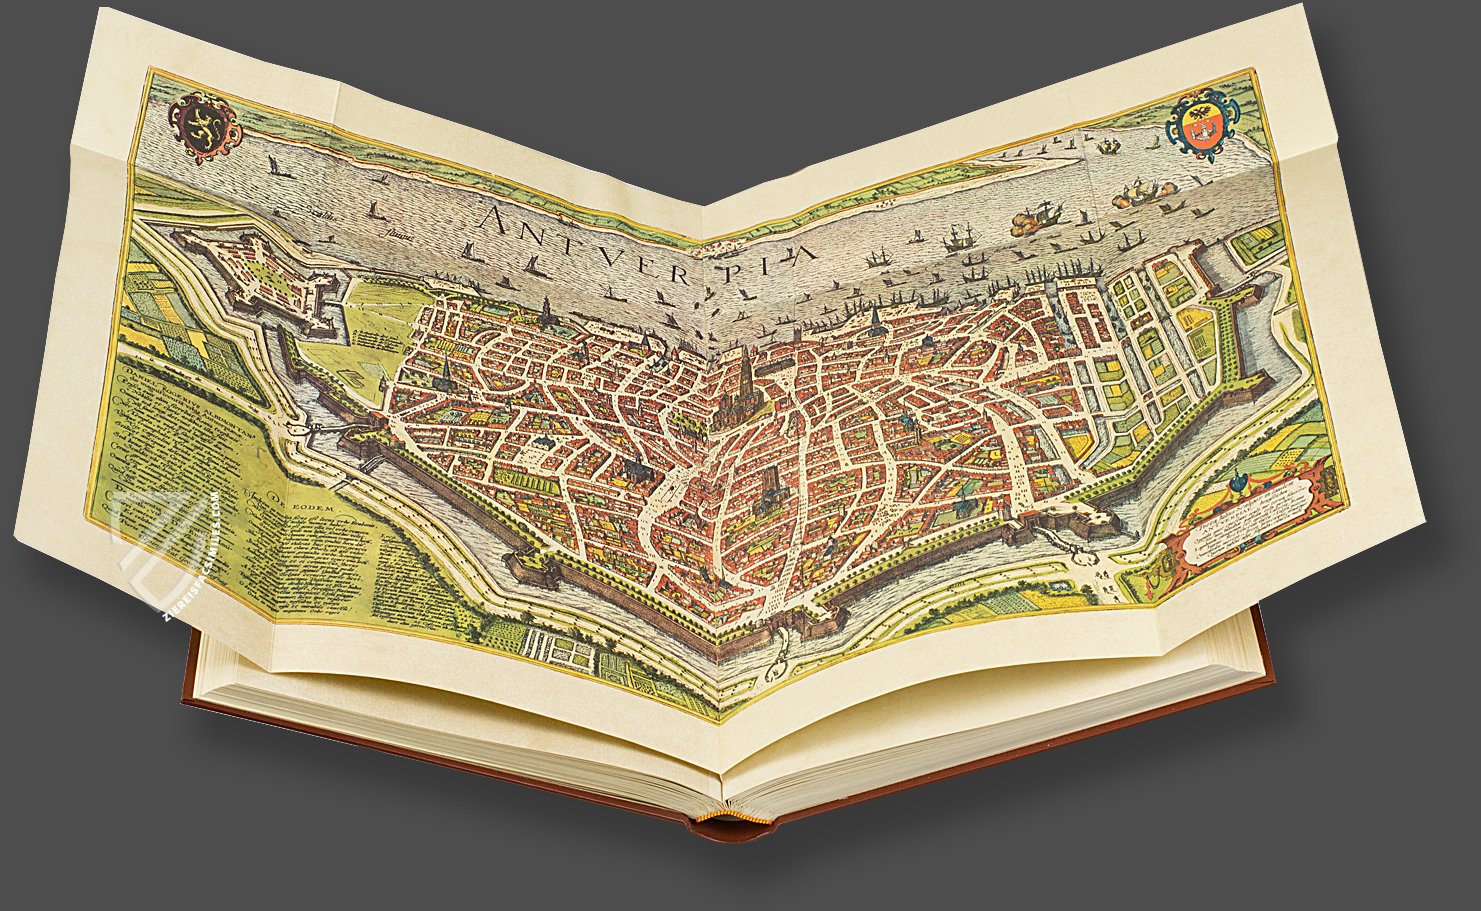 Mapping the towns of Europe: The European towns in Braun & Hogenberg's Town  Atlas, 1572-1617